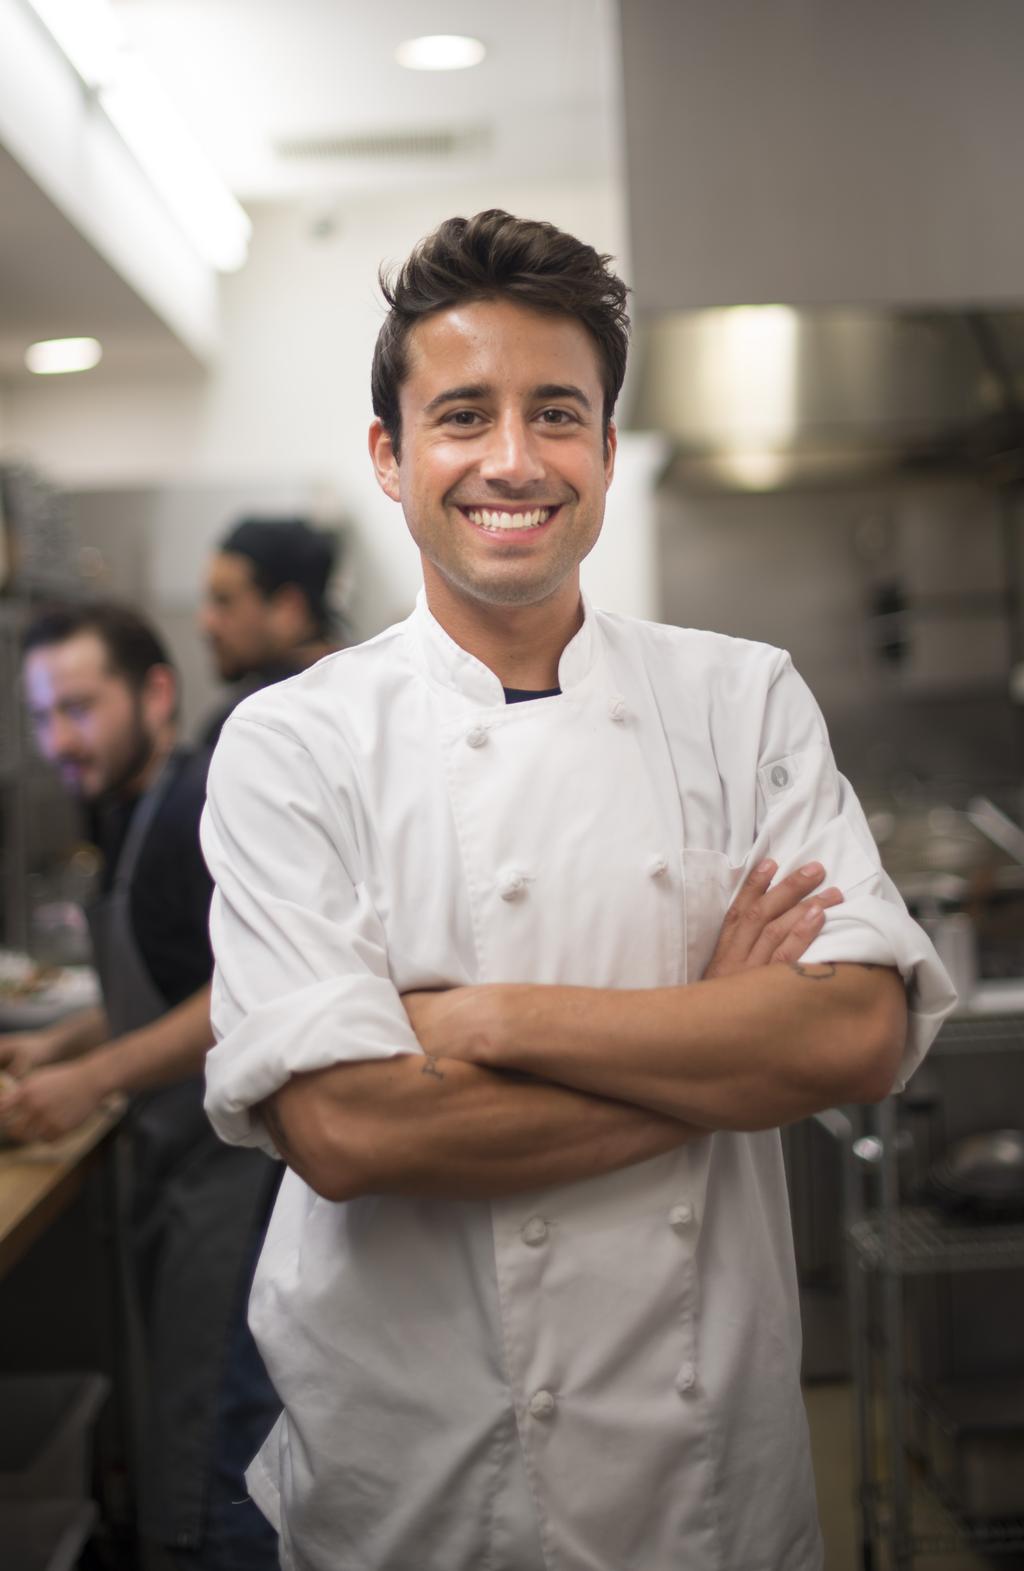 Chef Gruel Seafood Guru - Sandwich Junkie - Restaurateur Andrew Gruel, a graduate of Johnson & Wales University, is currently the Founder and Executive Chef of Slapfish Restaurant, the award-winning